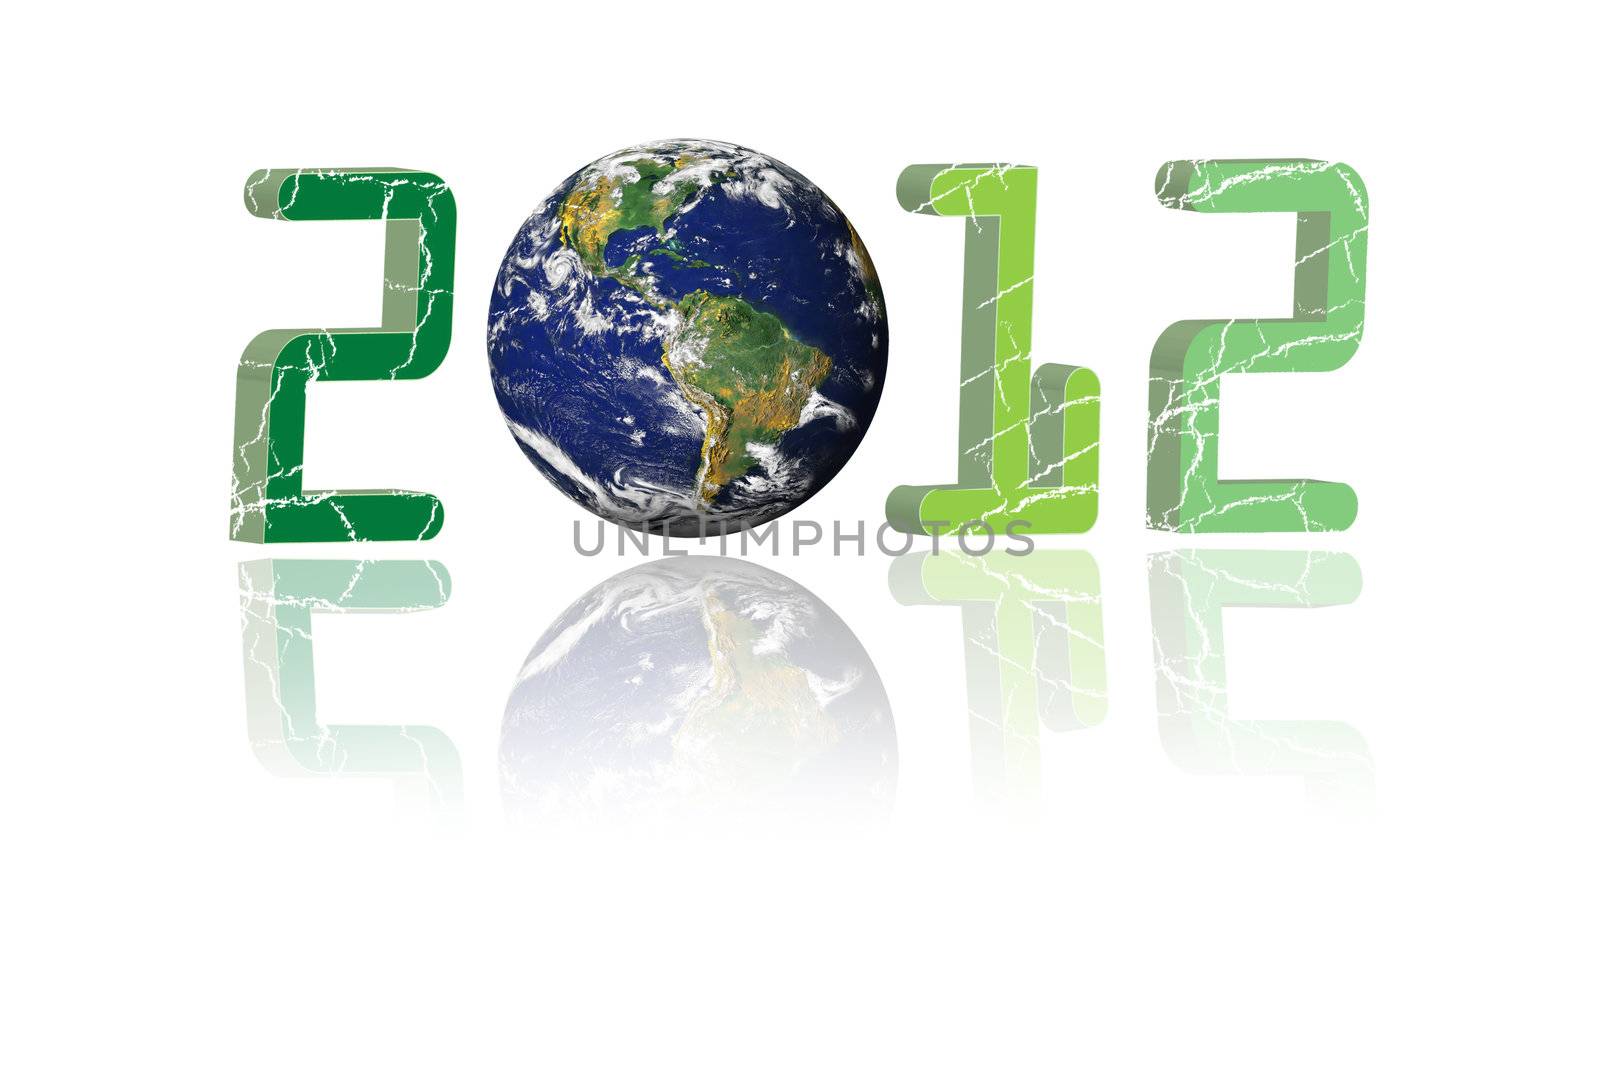 Creative 2012 New Year concept with blue Earth globe isolated on white reflective background